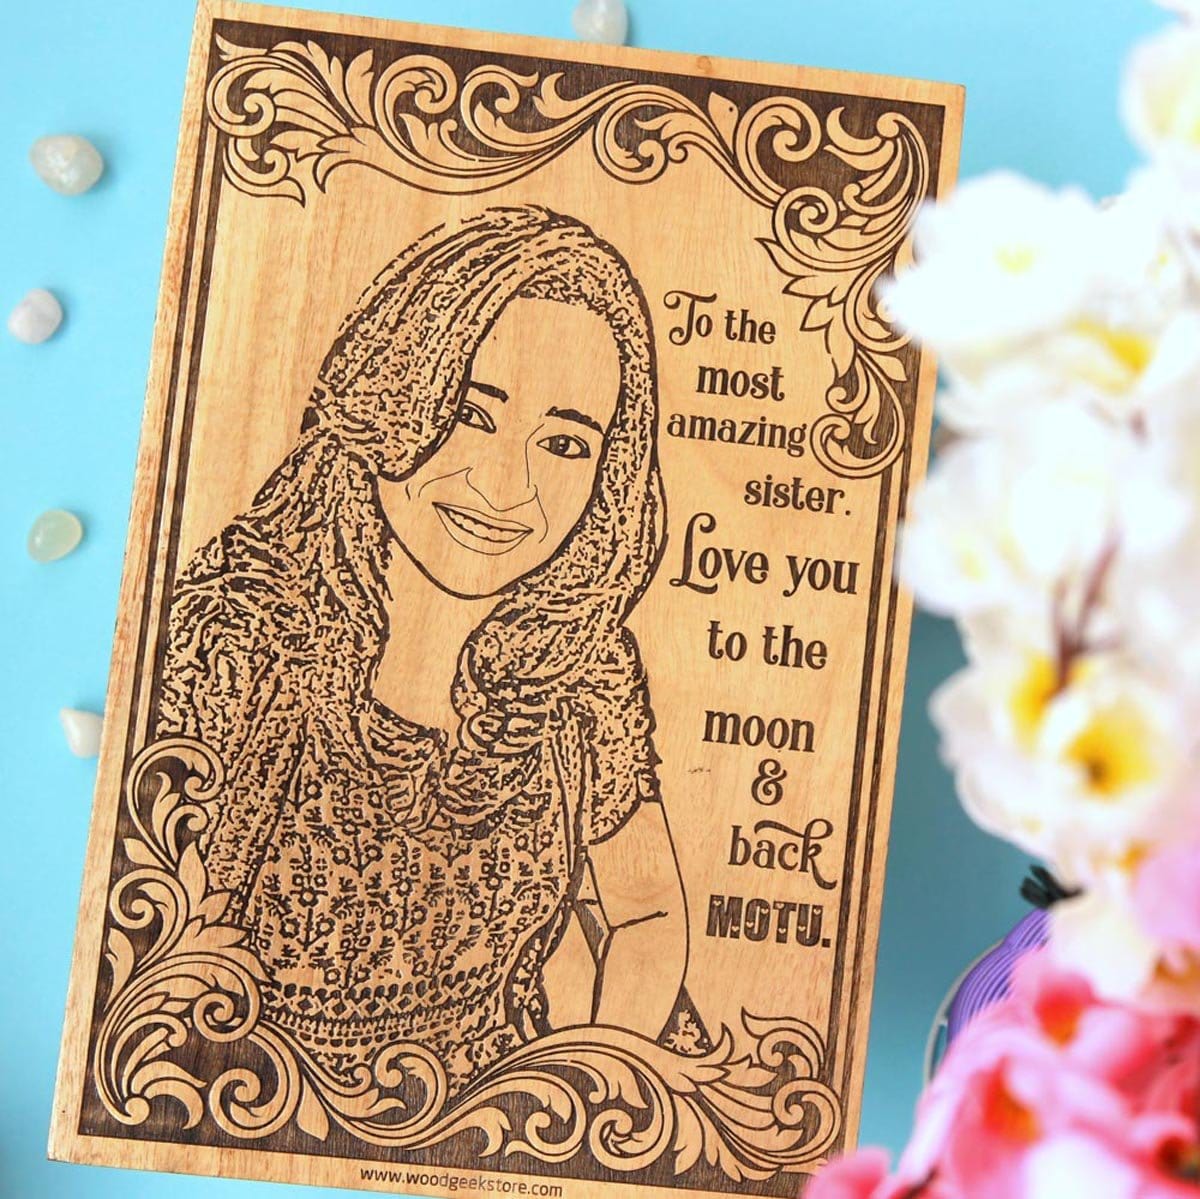 To The Most Amazing Sister. Love You To The Moon And Back. Looking for unique birthday gifts for your sister or rakhi gifts for her? This photo on wood will make the best gift for sister!